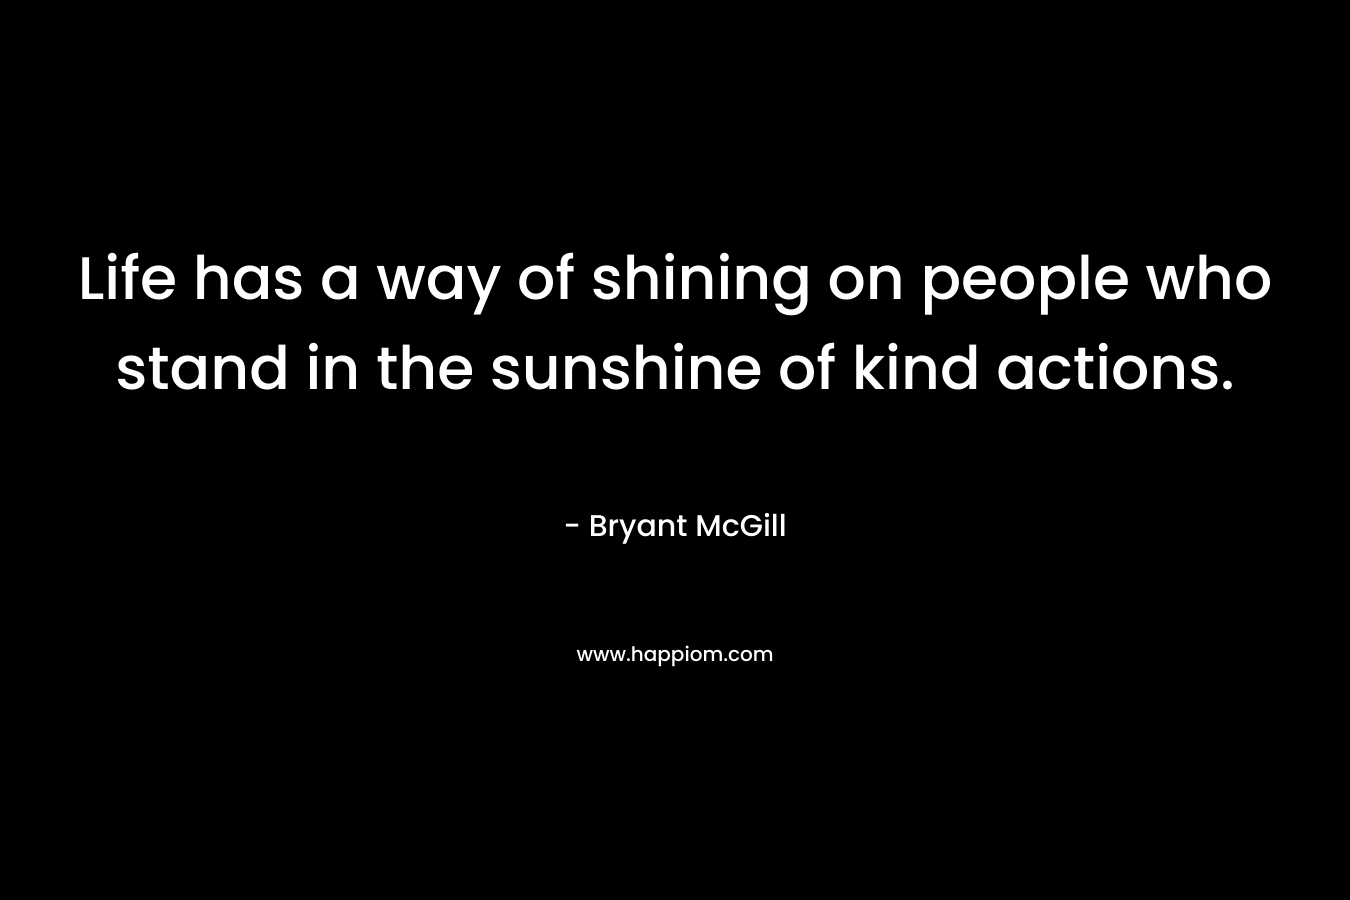 Life has a way of shining on people who stand in the sunshine of kind actions.